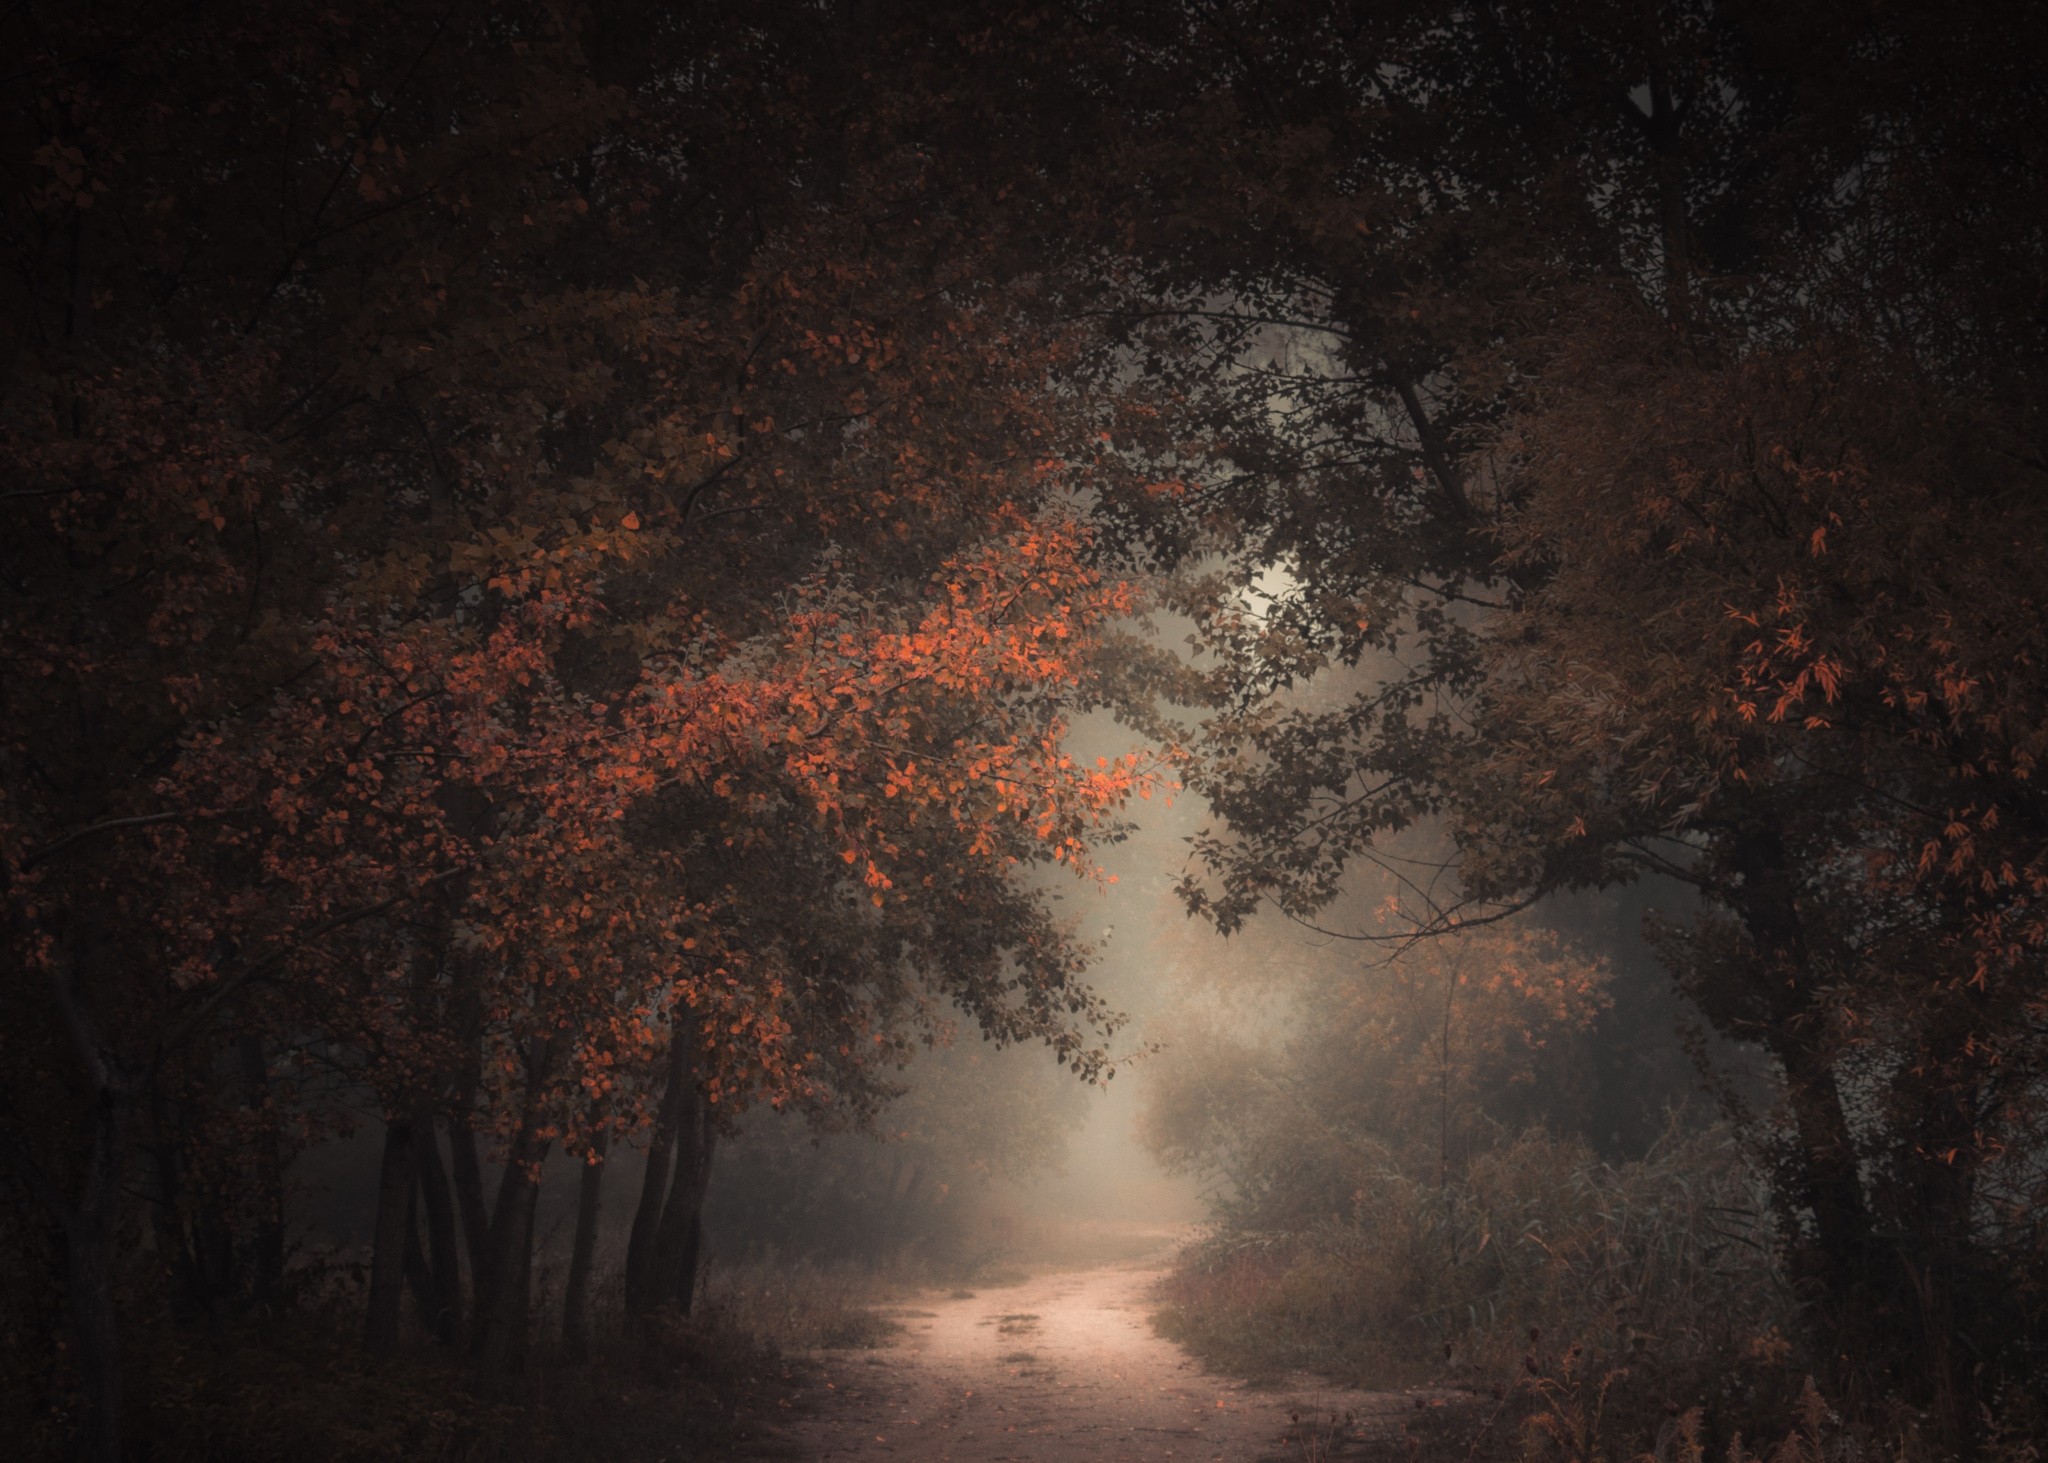 General 2048x1463 nature morning forest fall dirt road mist path trees atmosphere dark